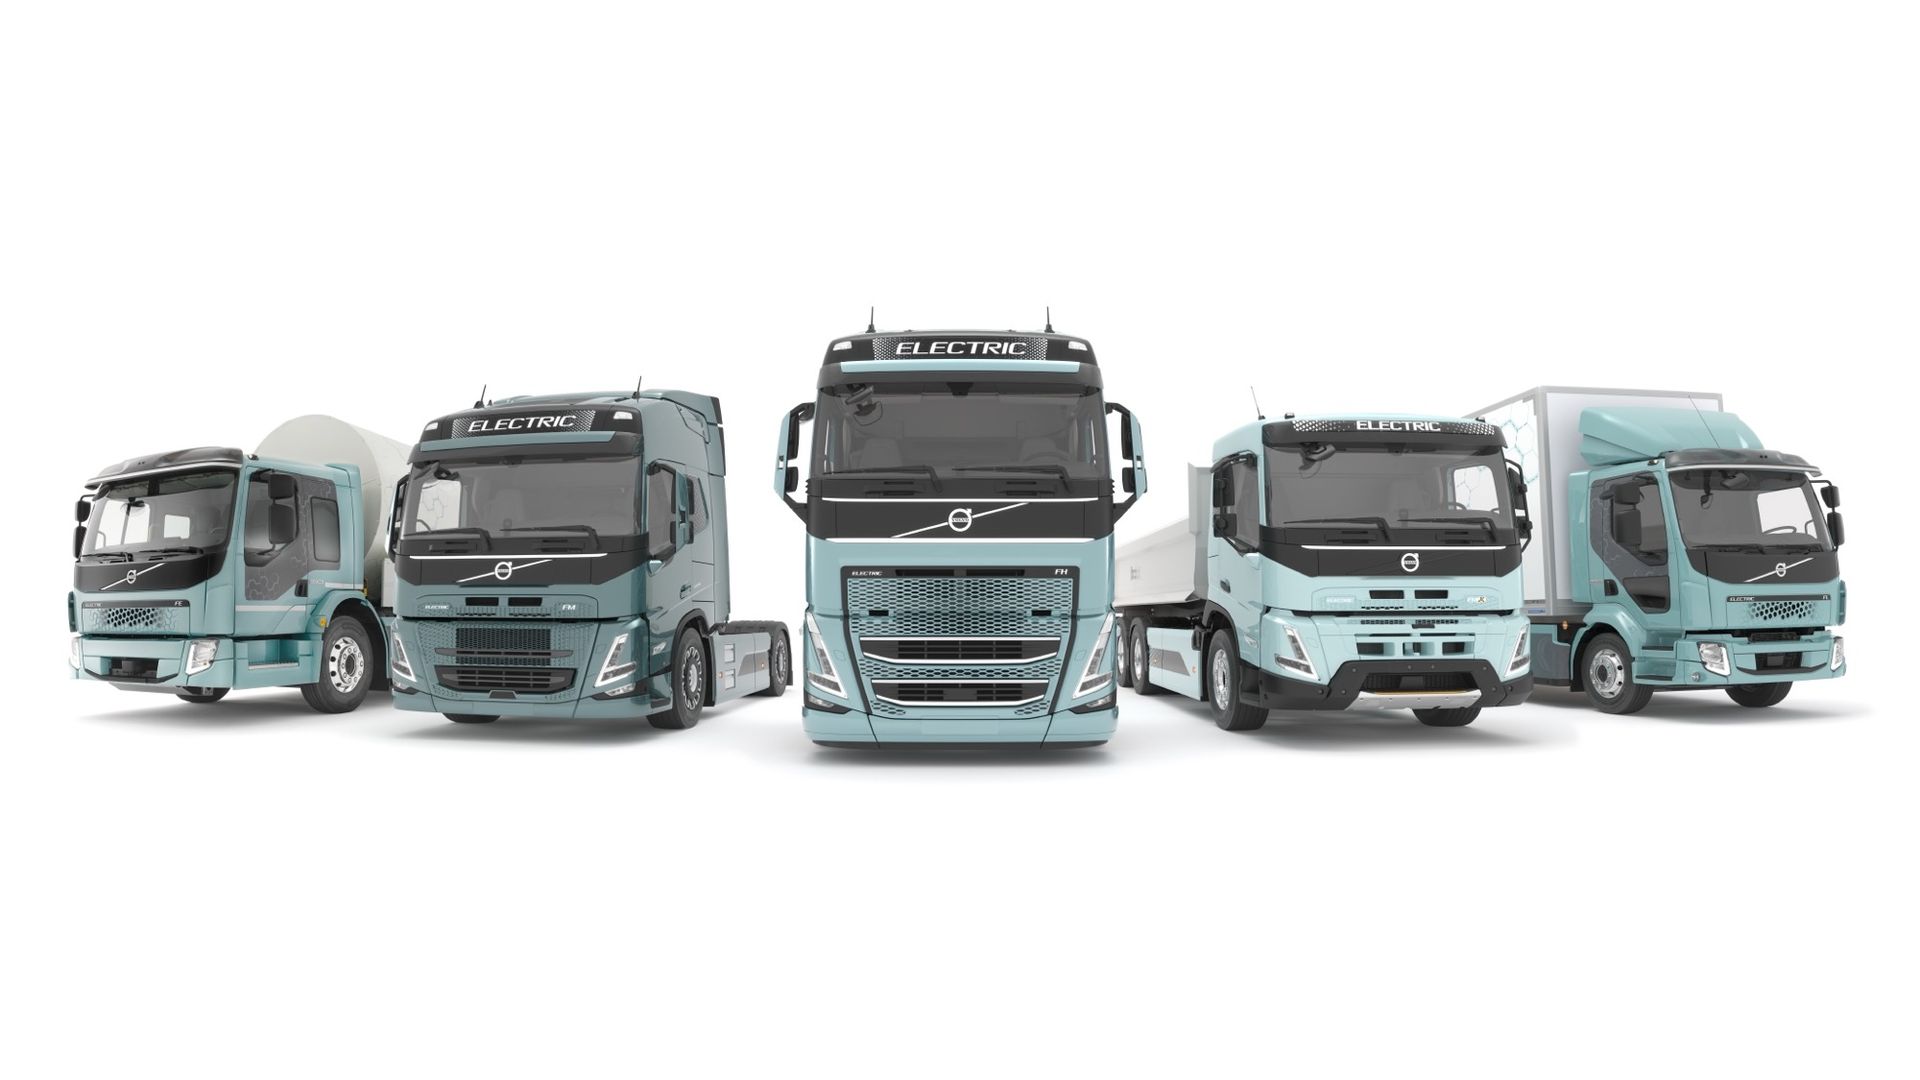 Volvo presents a complete range of electric trucks